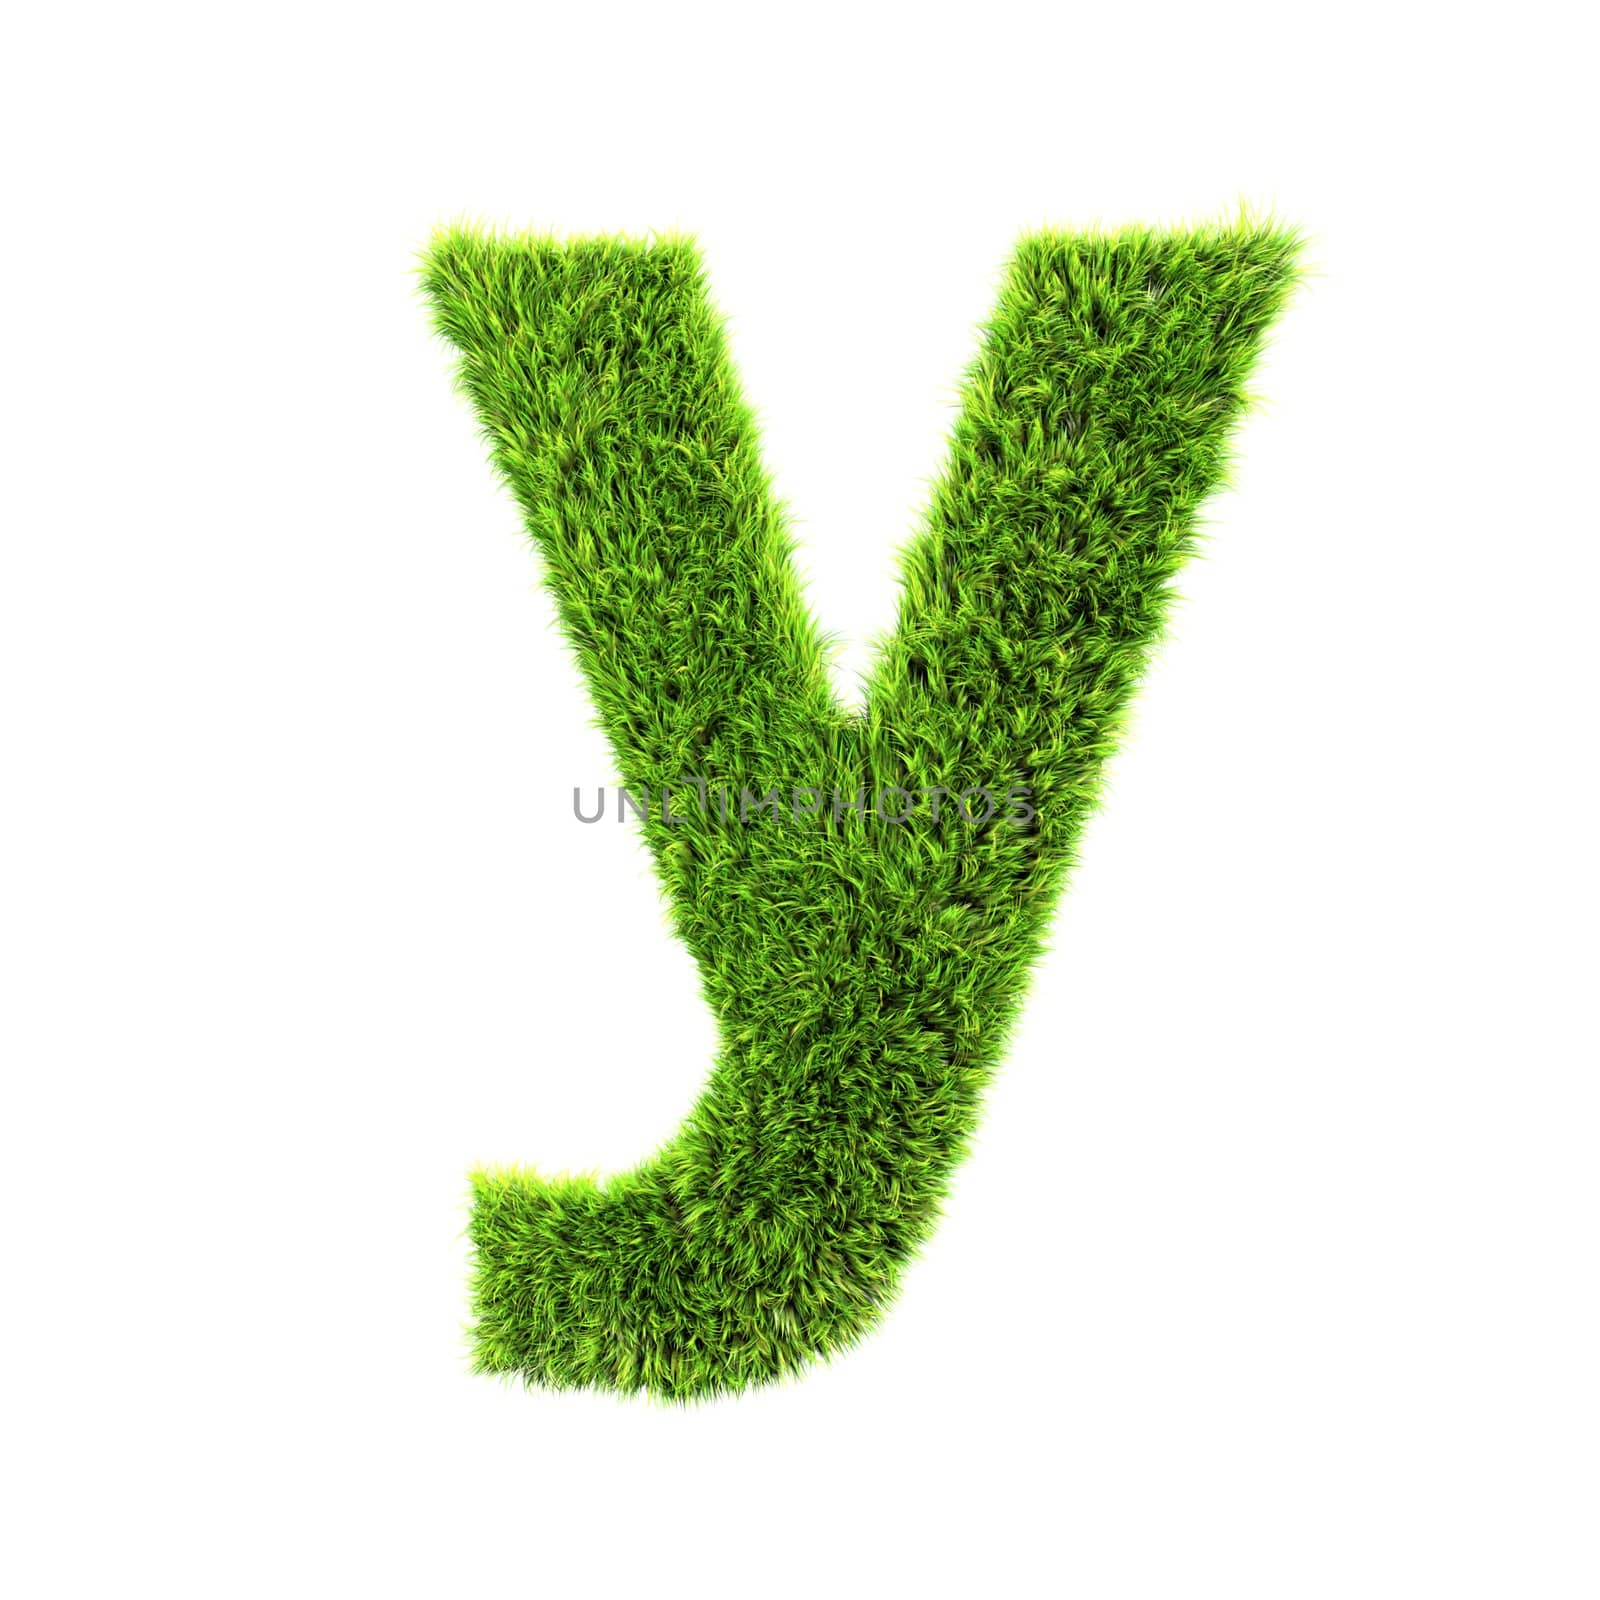 3d grass letter isolated on white background - y by chrisroll